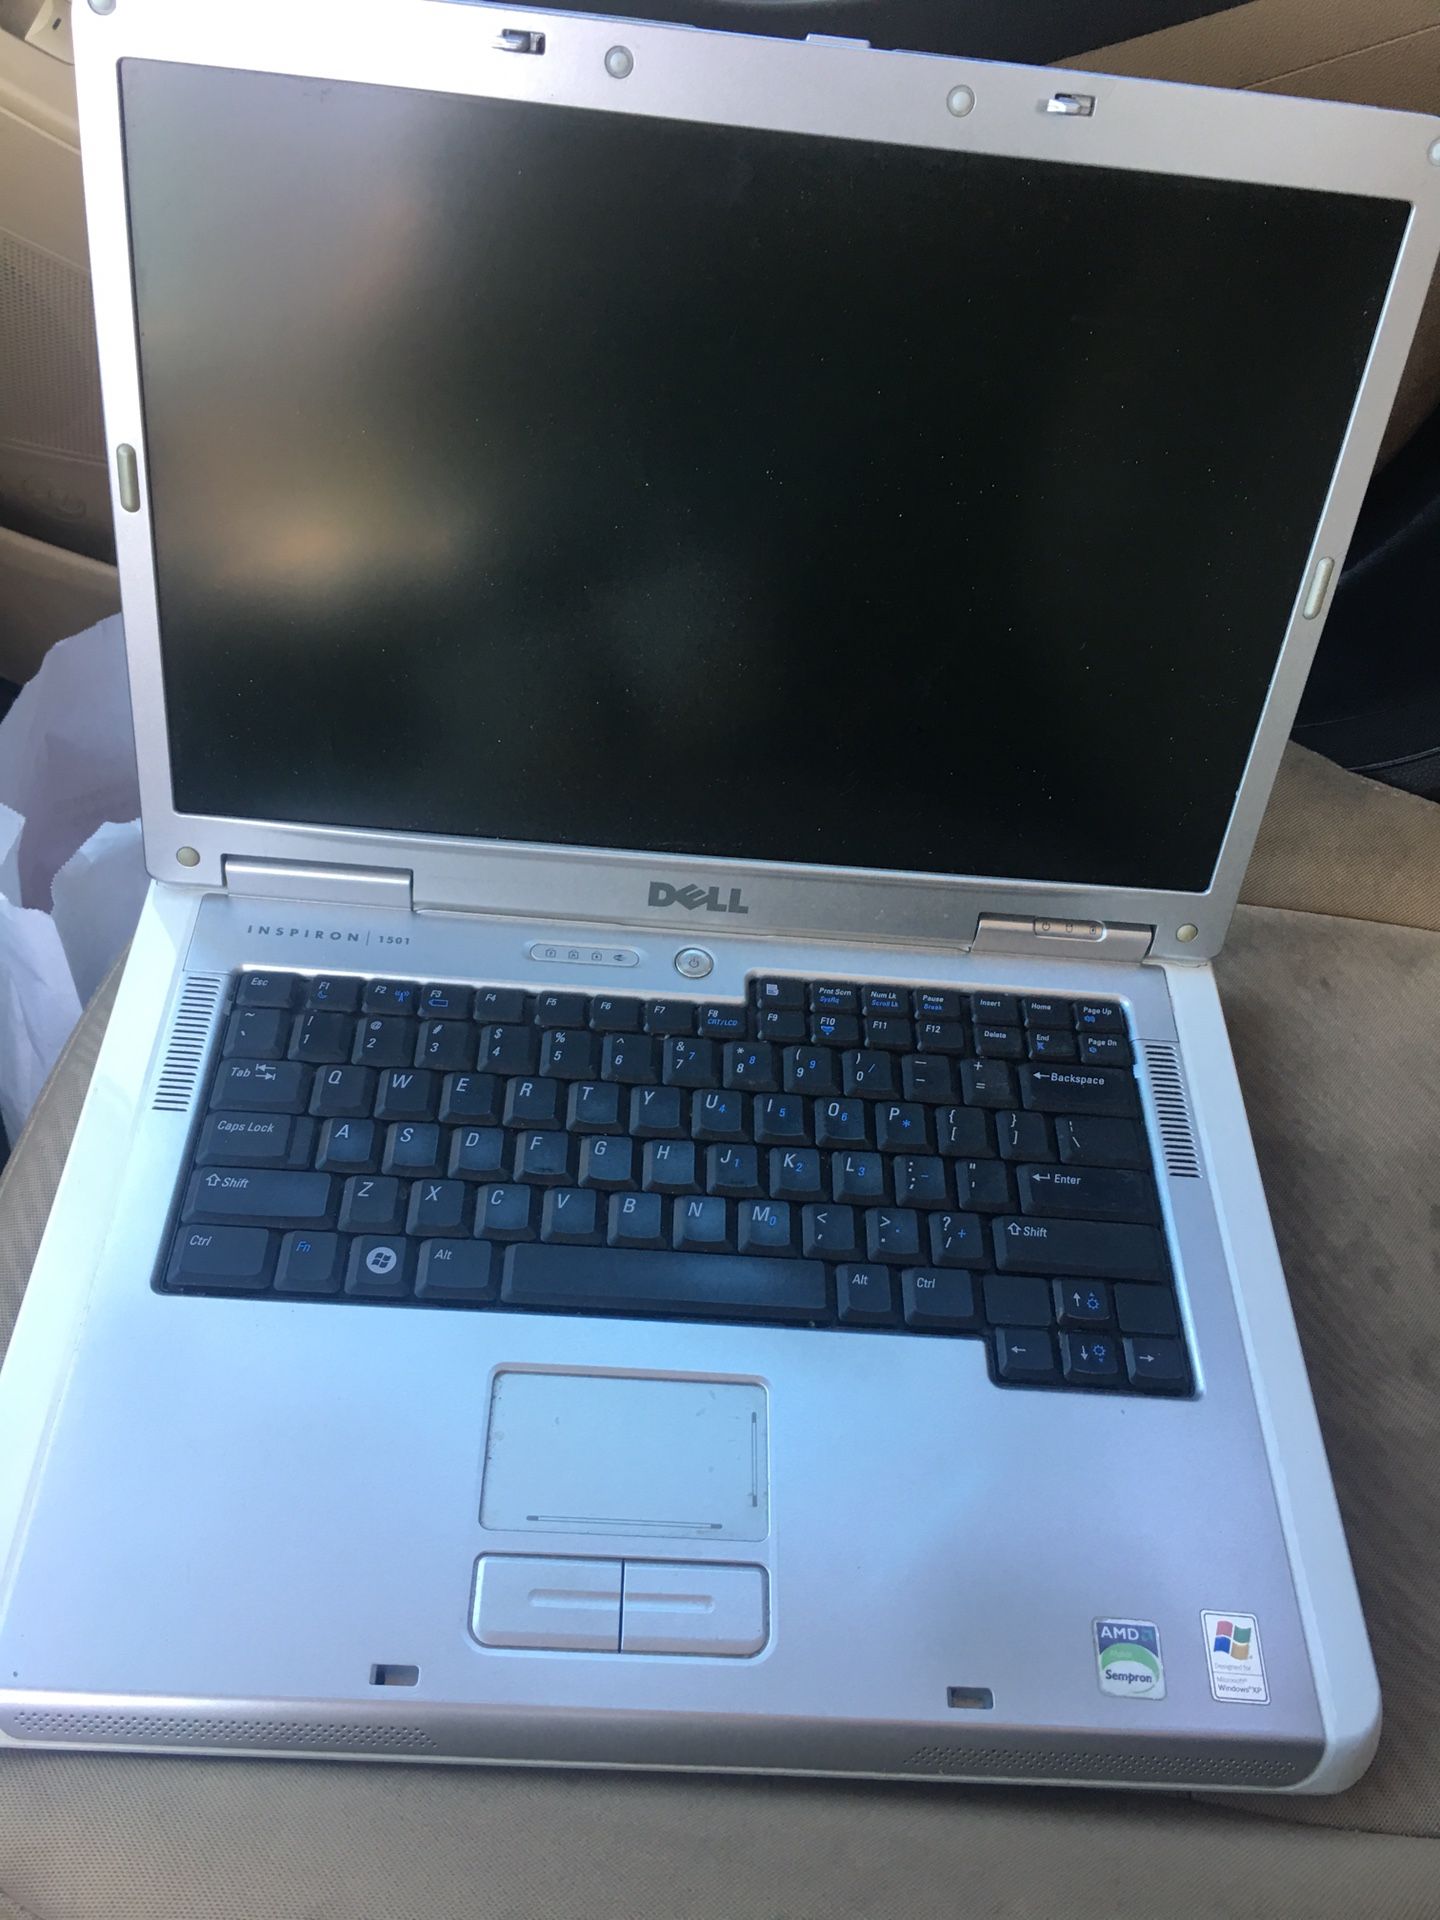 Dell laptop parts computer.The screen is not cracked.PARTS COMPUTER